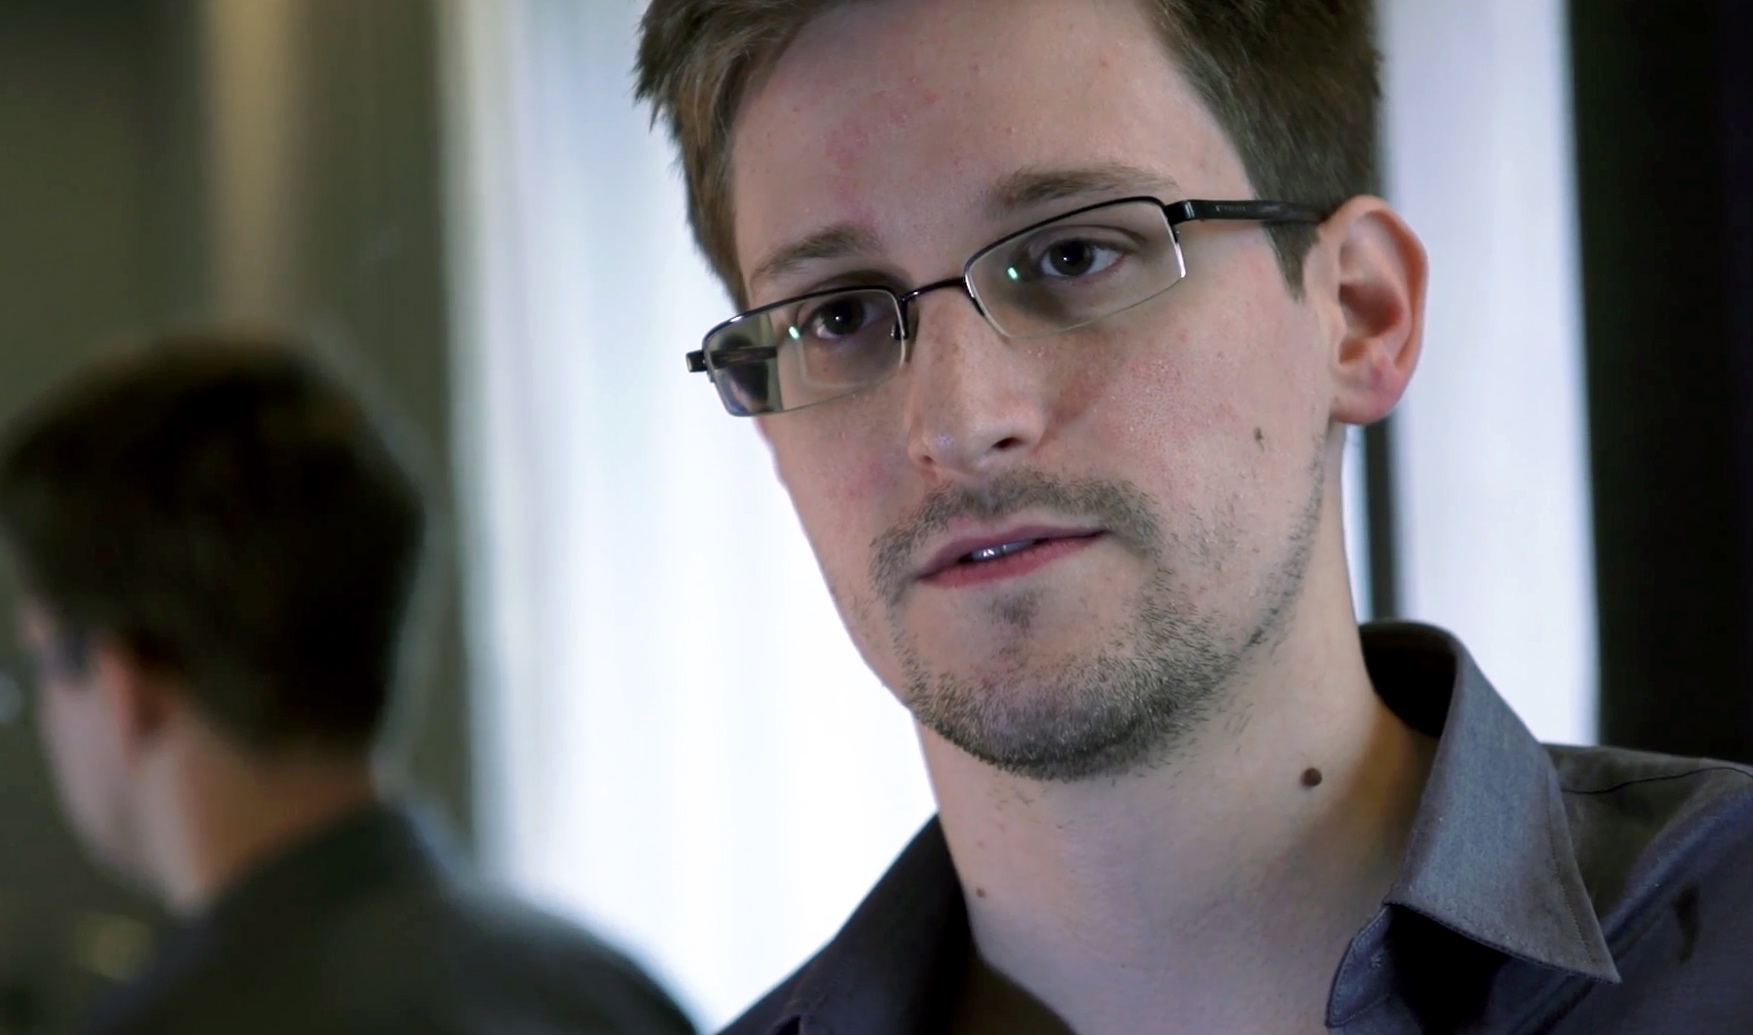 Edward Snowden worked as a contract employee at the National Security Agency on Sunday in Hong Kong.